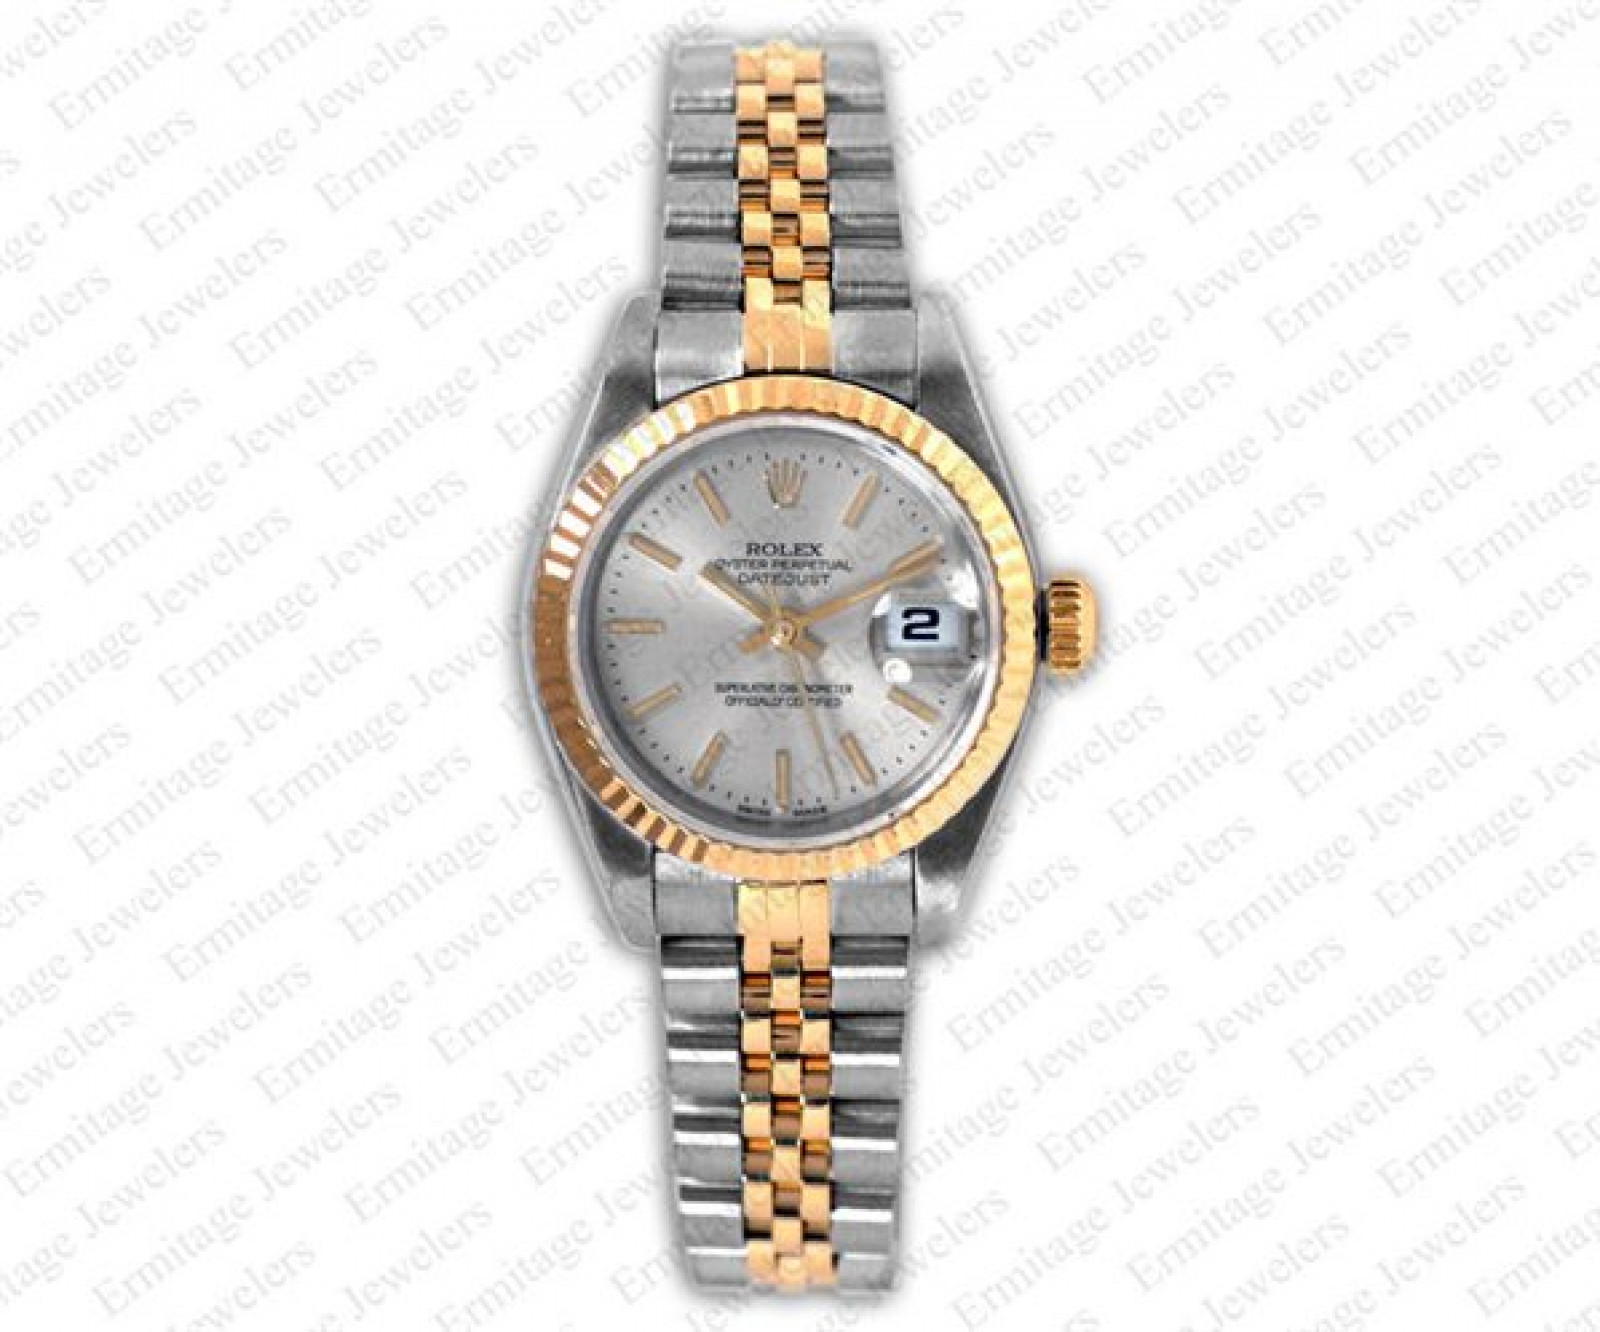 Pre-Owned Rolex Datejust 79173 Gold & Steel Year 2002